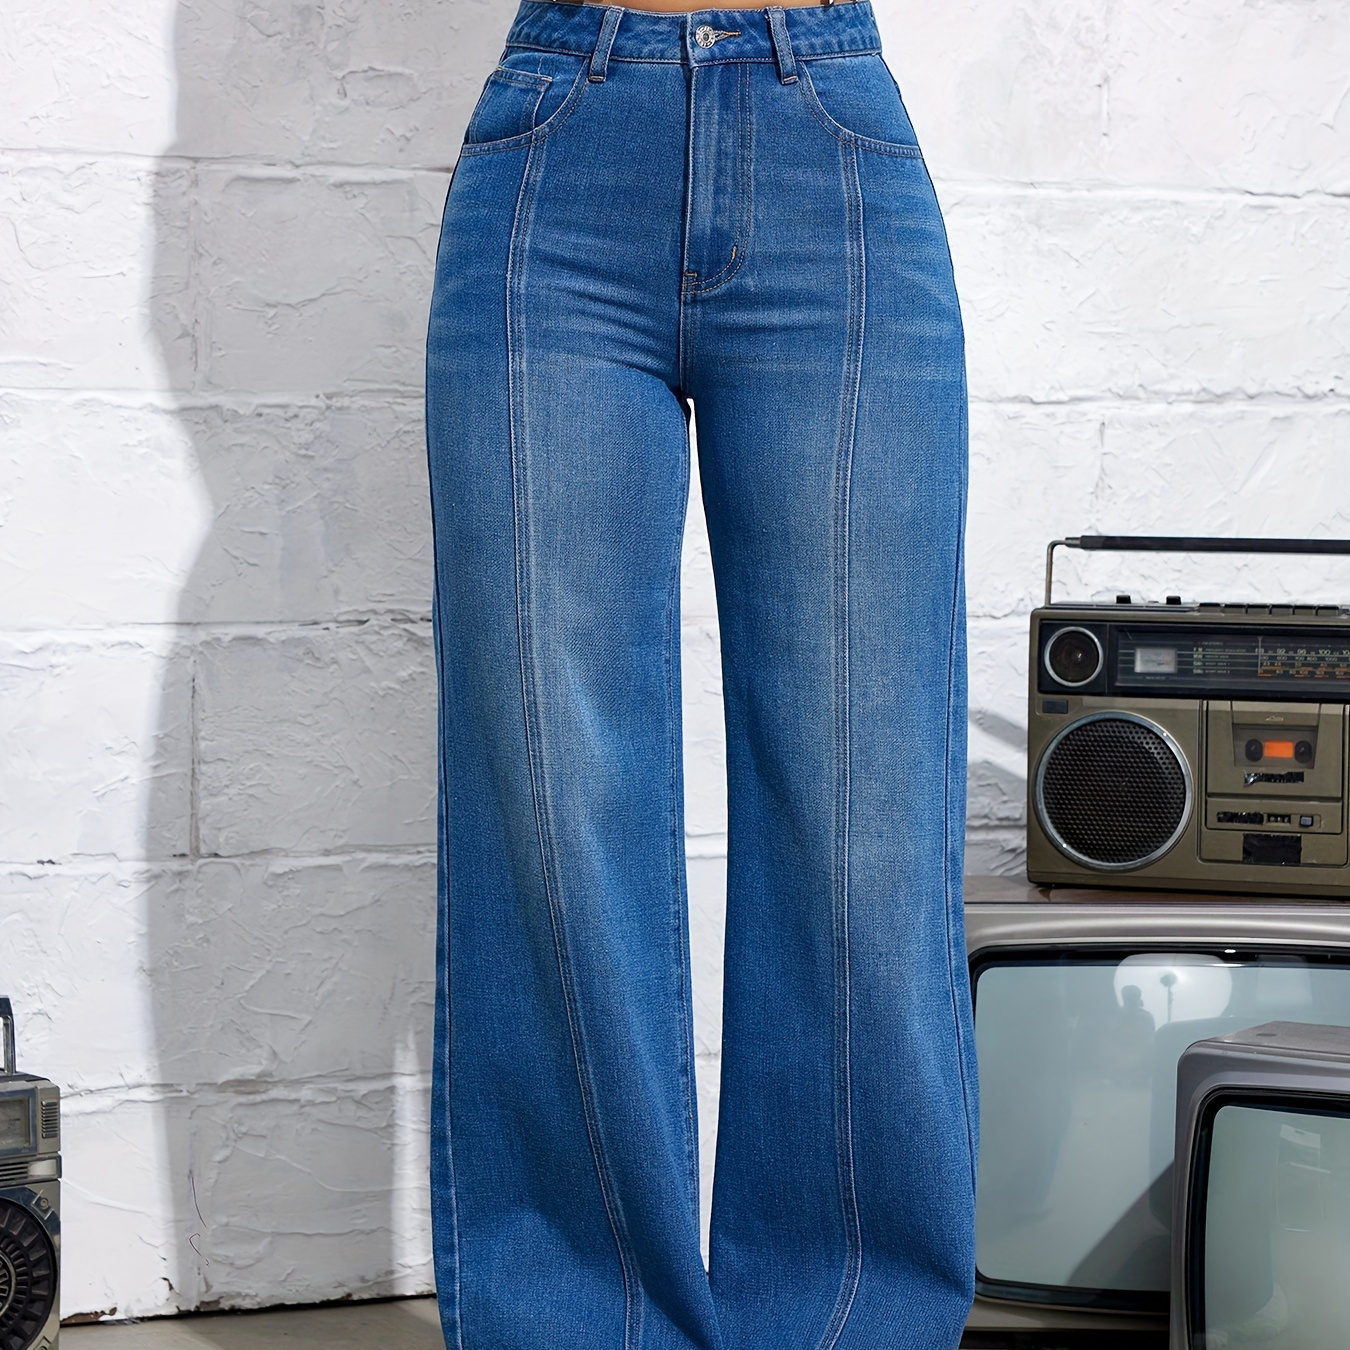 

Women's High-waisted Wide Leg Denim Jeans, Street Style, Non-stretch, Floor-length Casual Pants, Vintage Blue